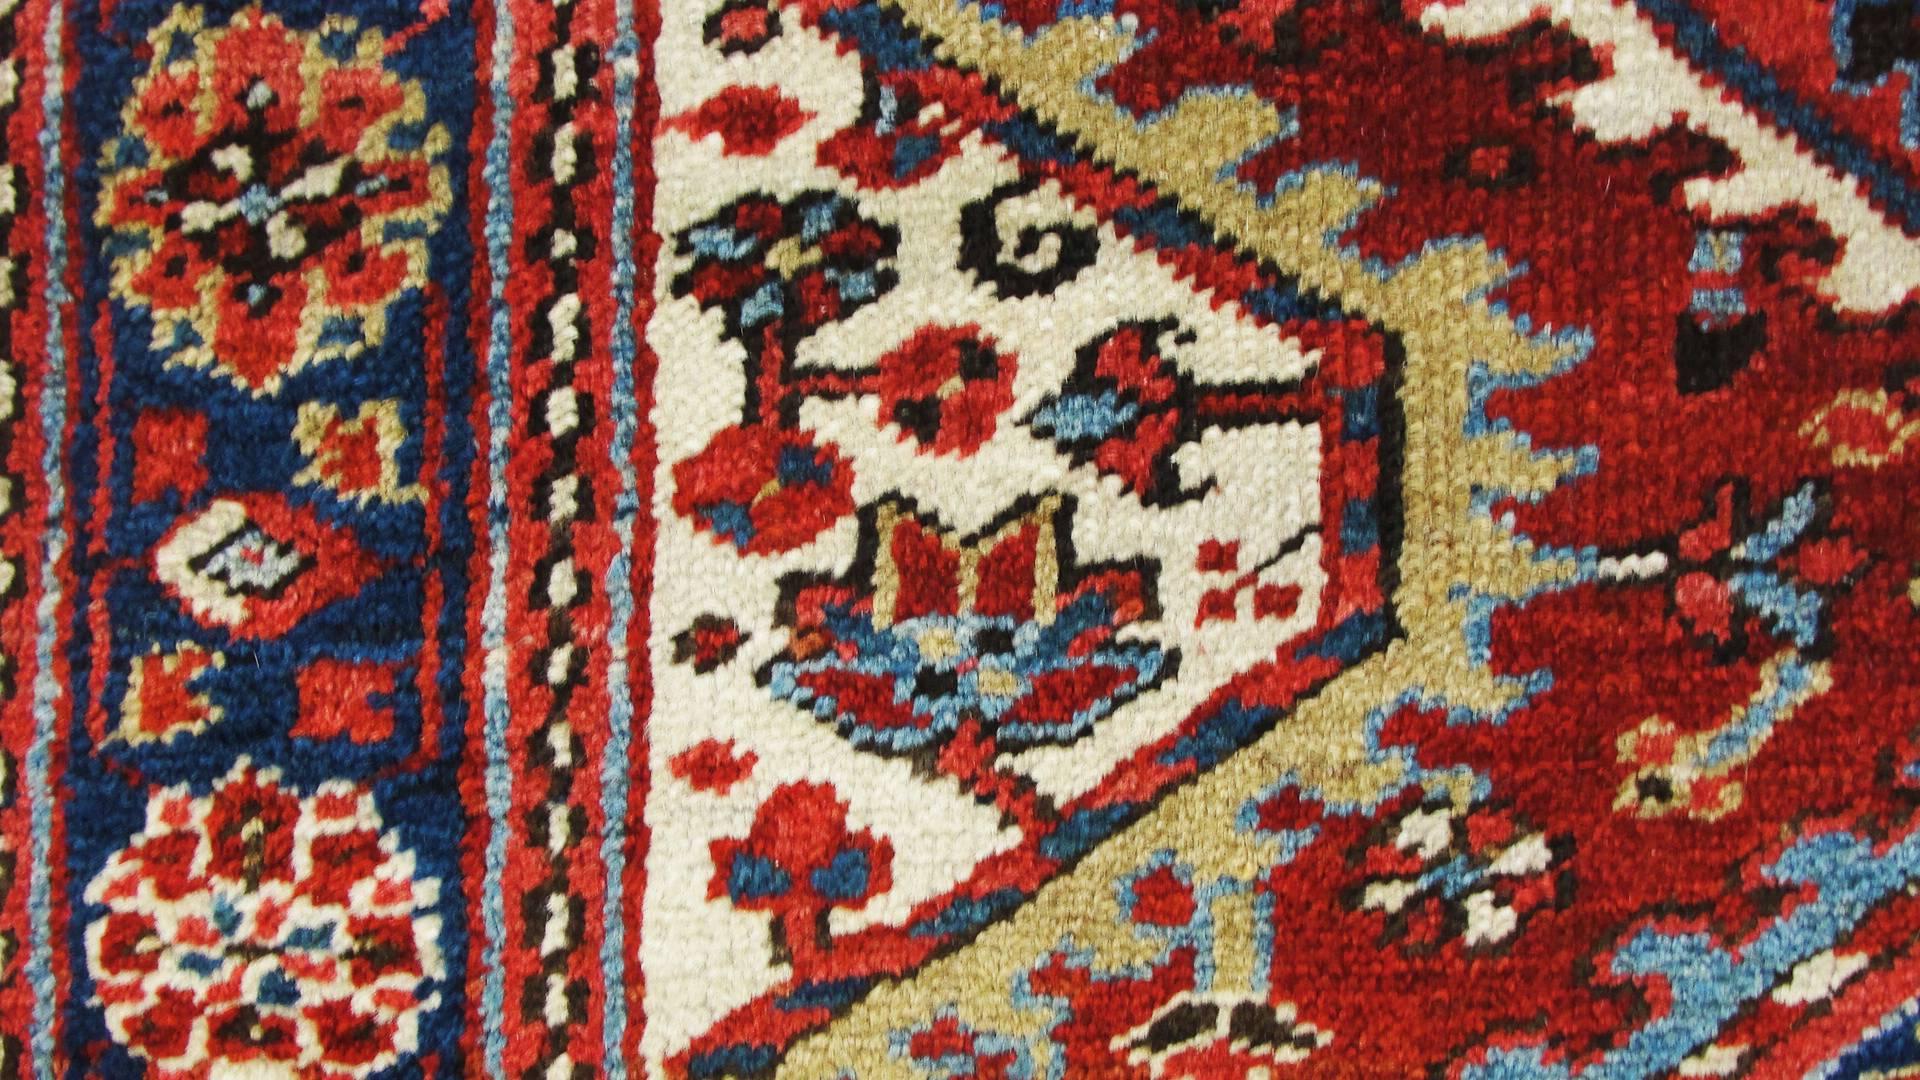 Great color combinations, vegetable dyed wool Persian Heriz, circa 1920.
A charming antique Persian Heriz carpet it has a range of outstanding colors. A great painting is measure by beauty of its colors and the same statement goes for this rug.